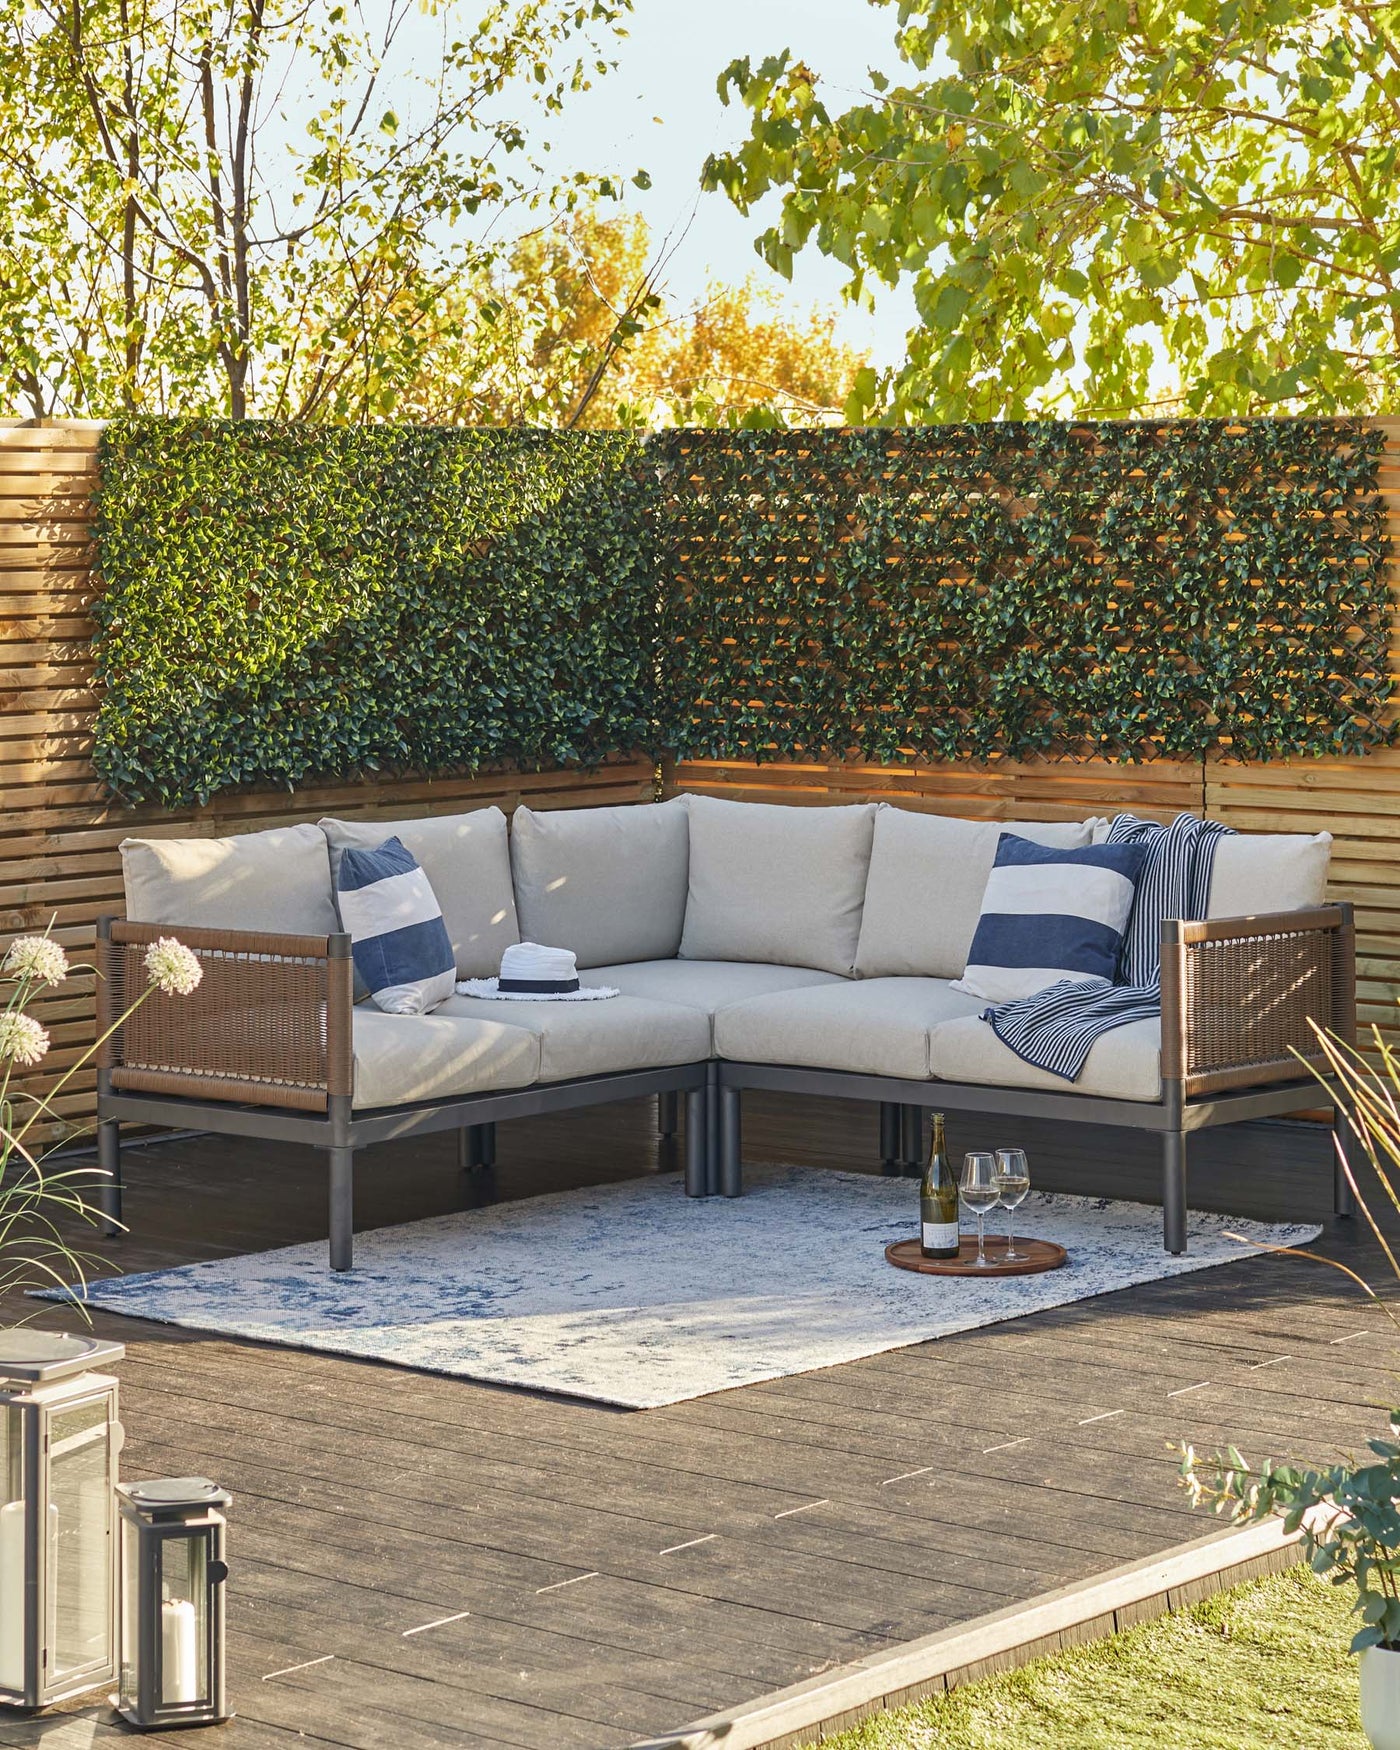 Outdoor corner sectional sofa with beige cushions, wicker accents, and a deep brown frame. The sectional is accessorized with navy and white striped throw pillows. A light-coloured outdoor rug lies beneath the sofa, and a small round wooden tray table with a bottle and glasses sits on the rug. Two metal lanterns rest to the side on the wooden deck amidst a garden setting with lush greenery.